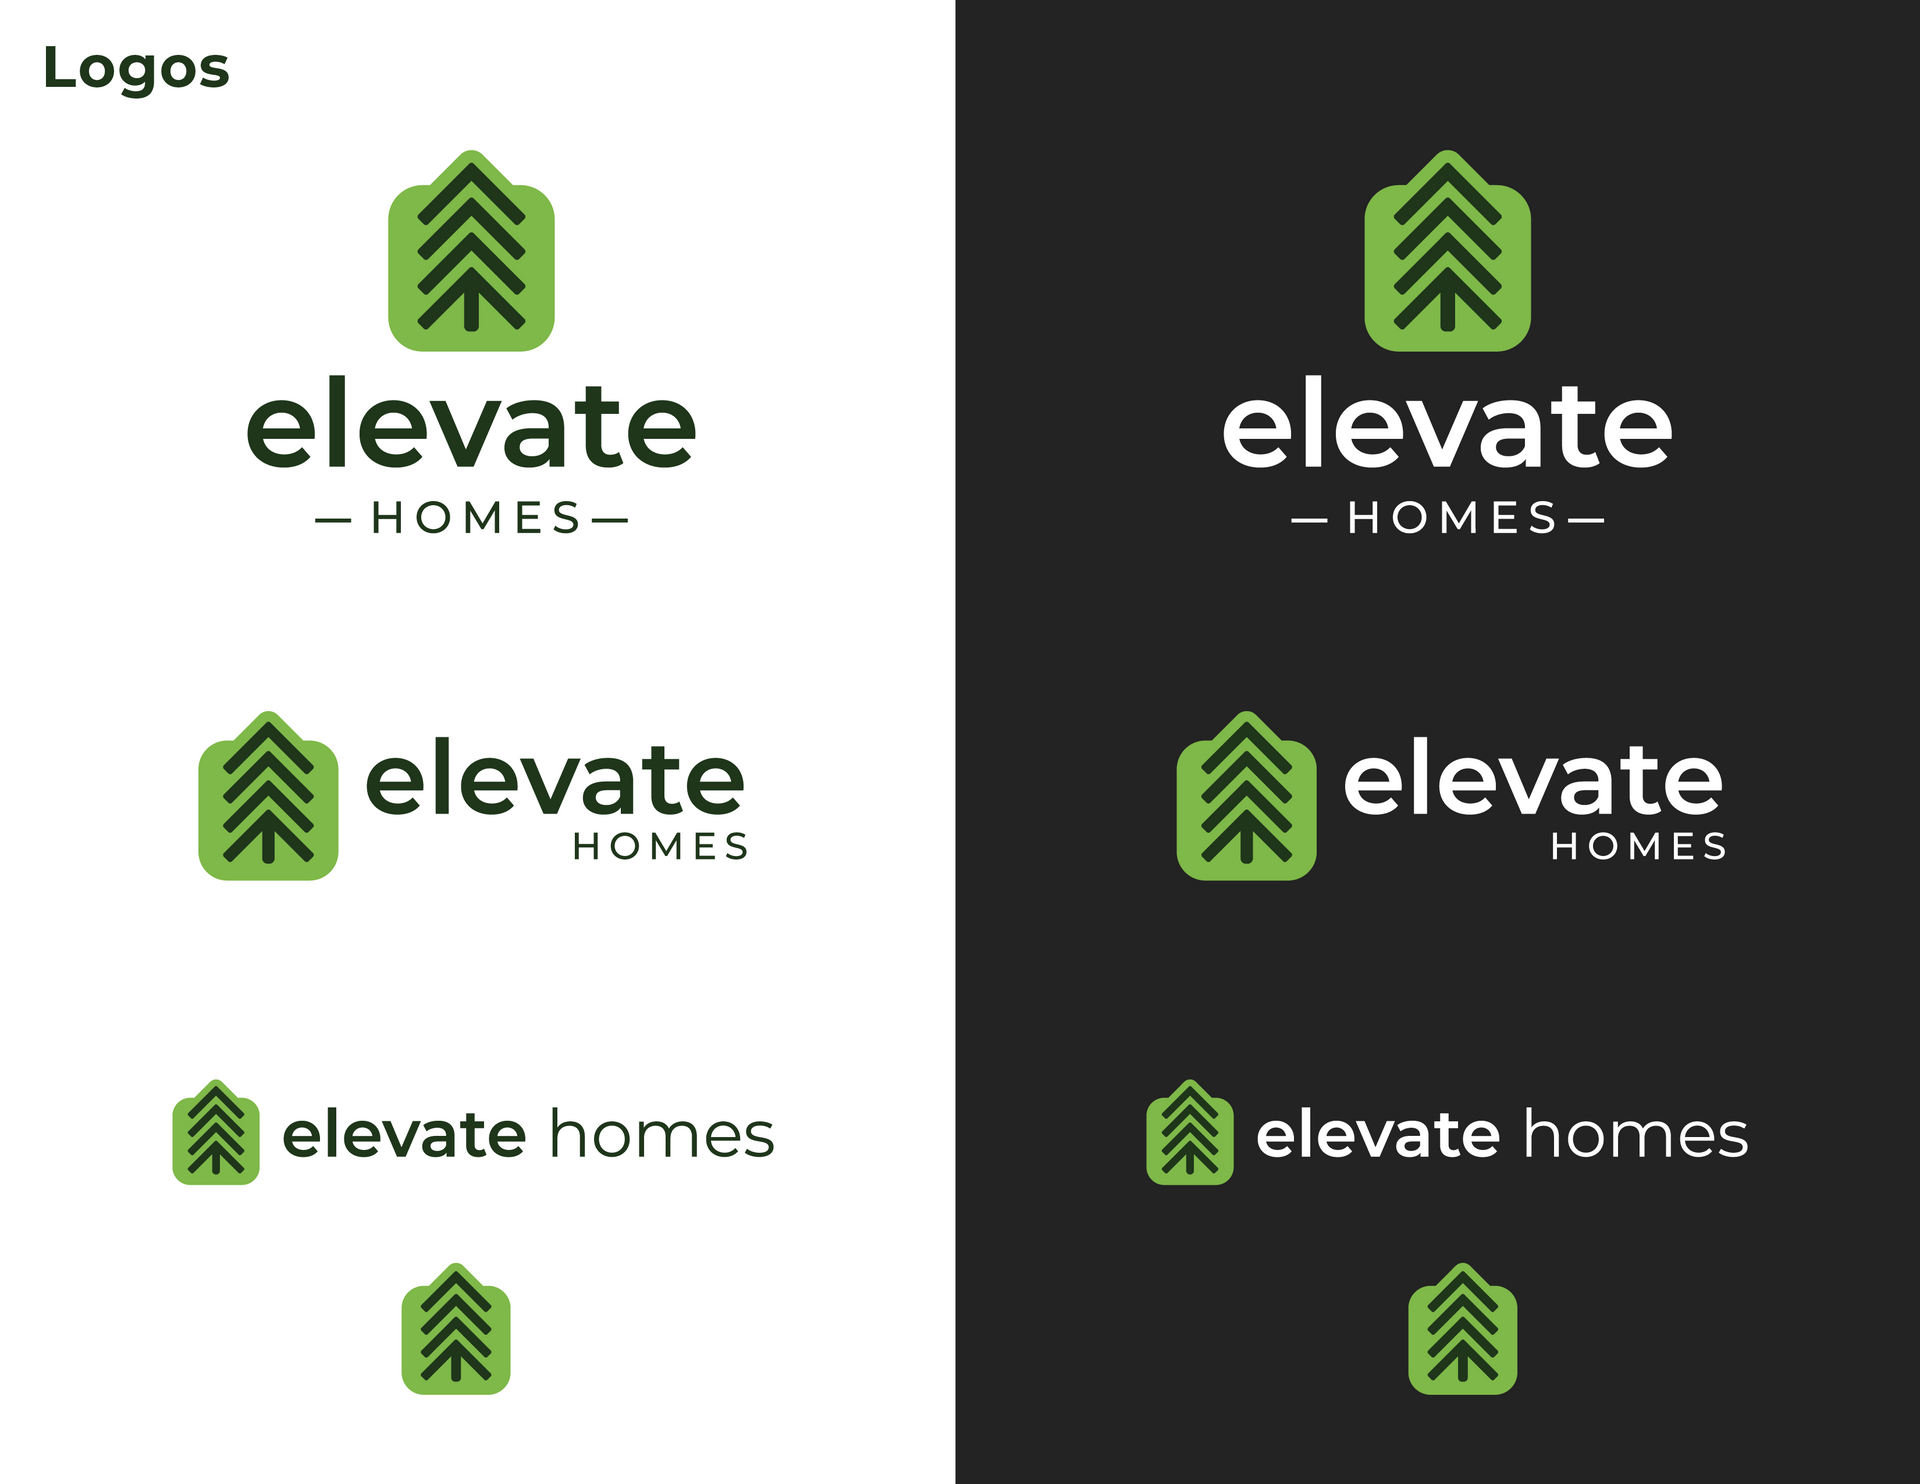 A logo for a real estate company called elevate homes.